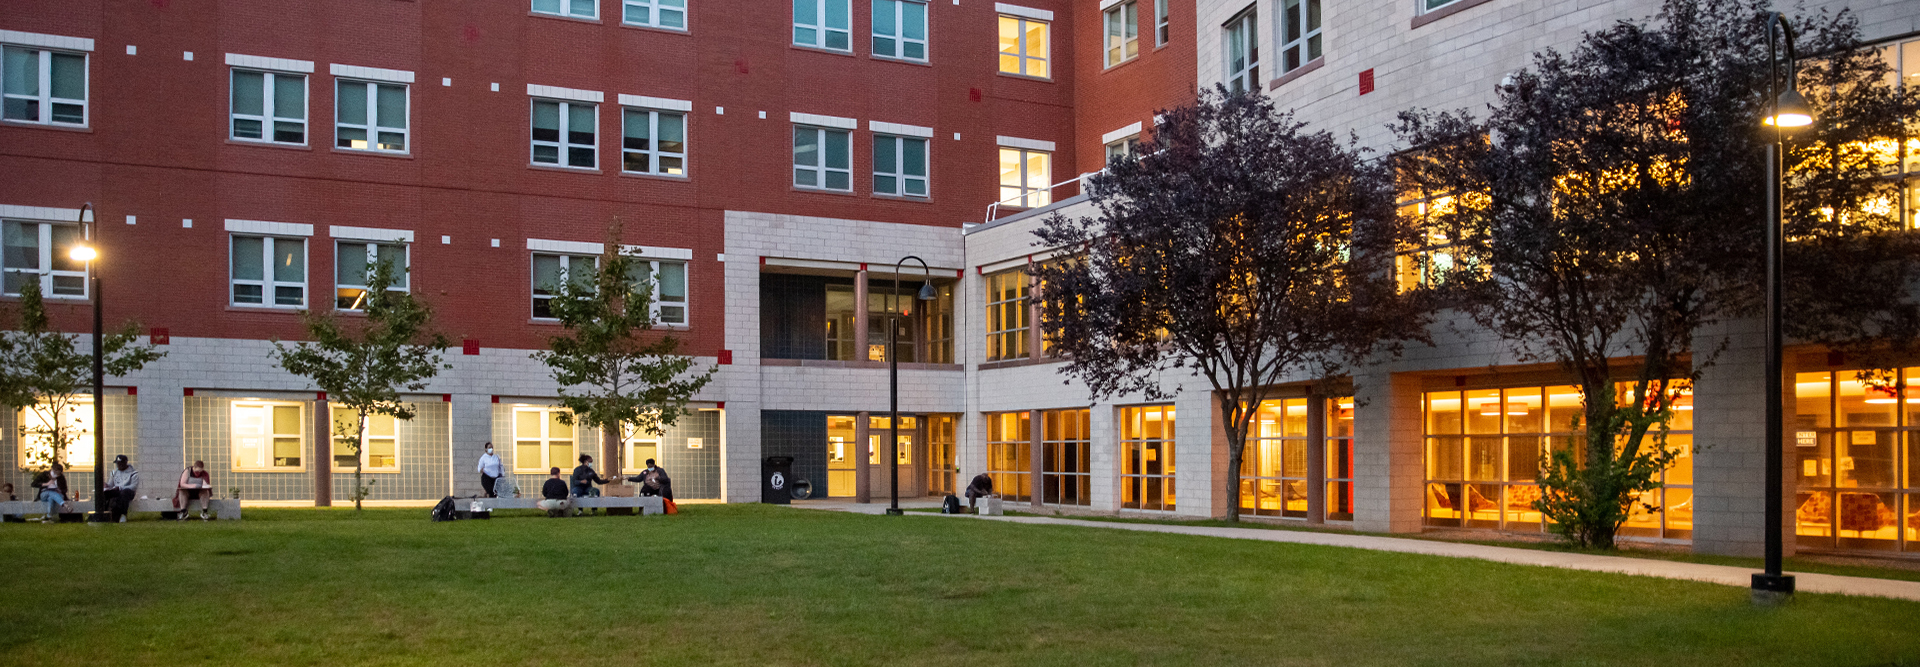 campus outdoors in the evening